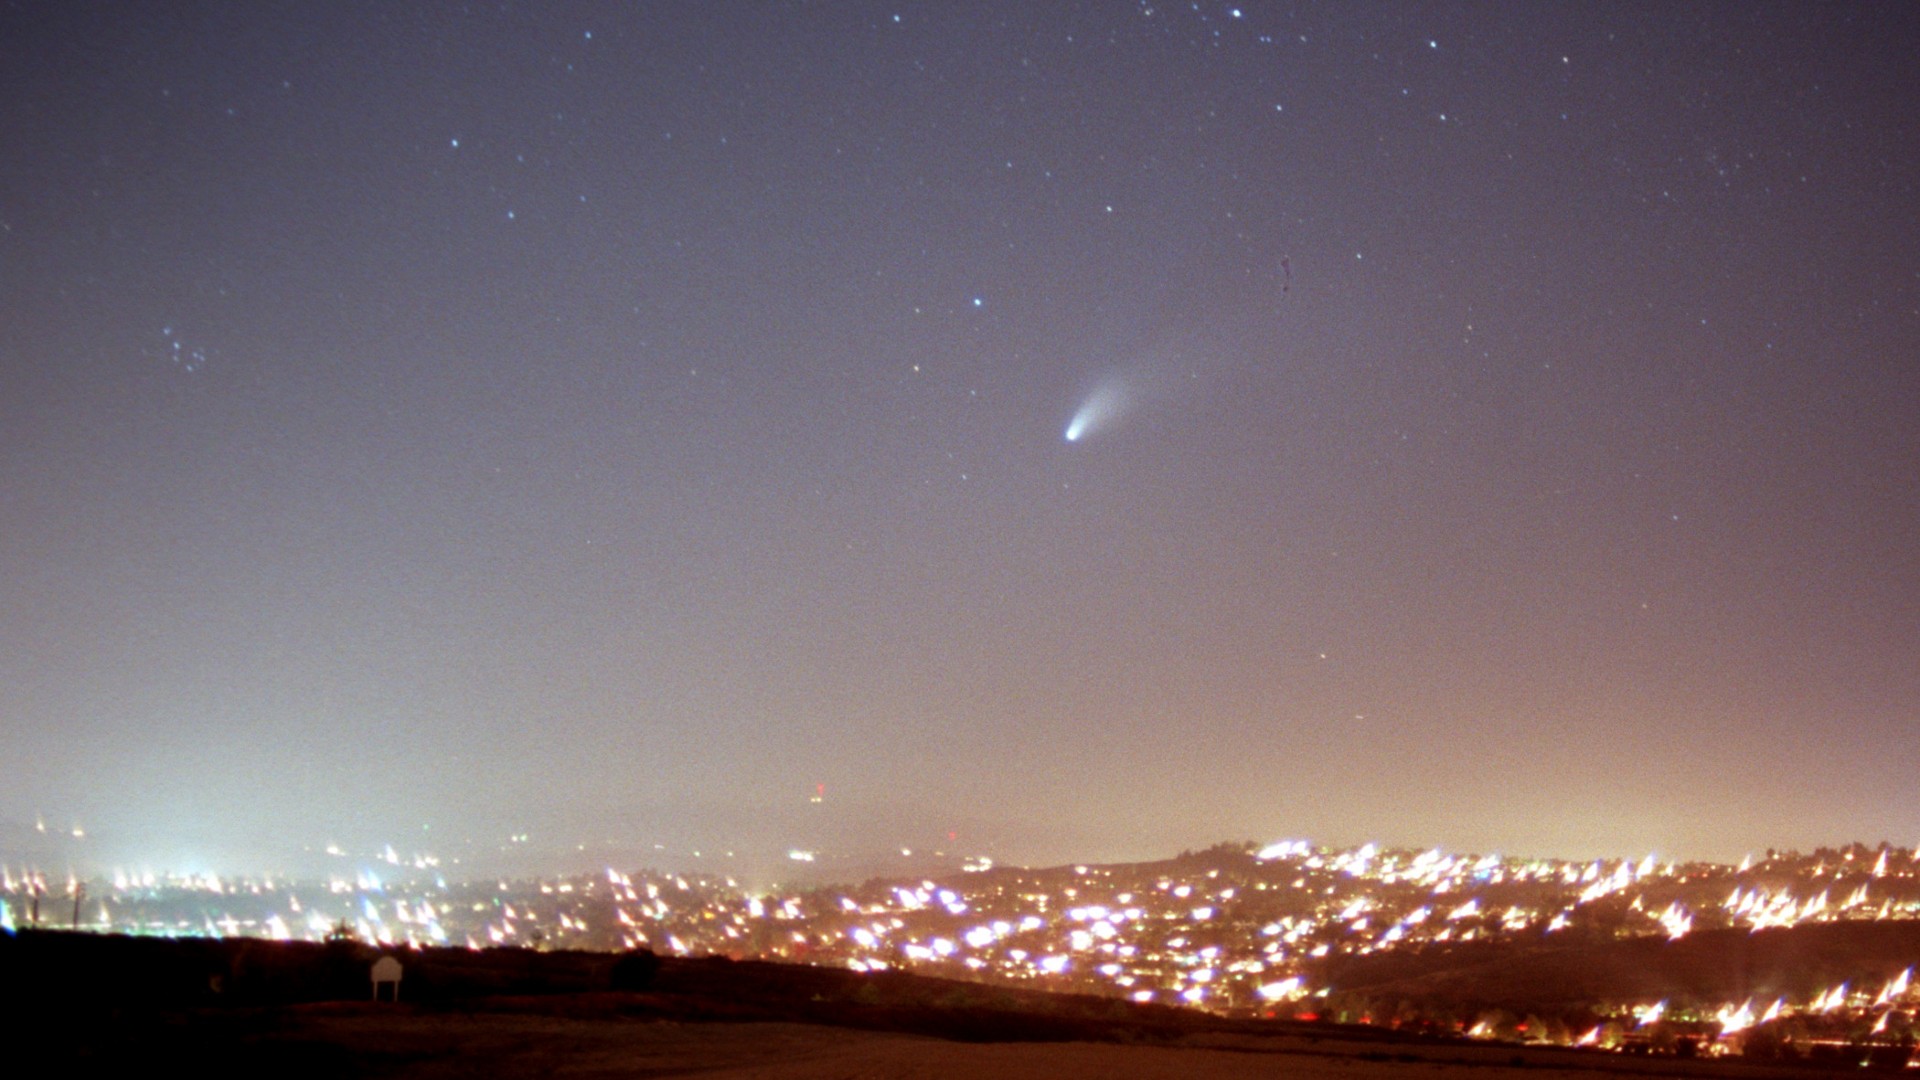 A bright comet over a bright field of city lights